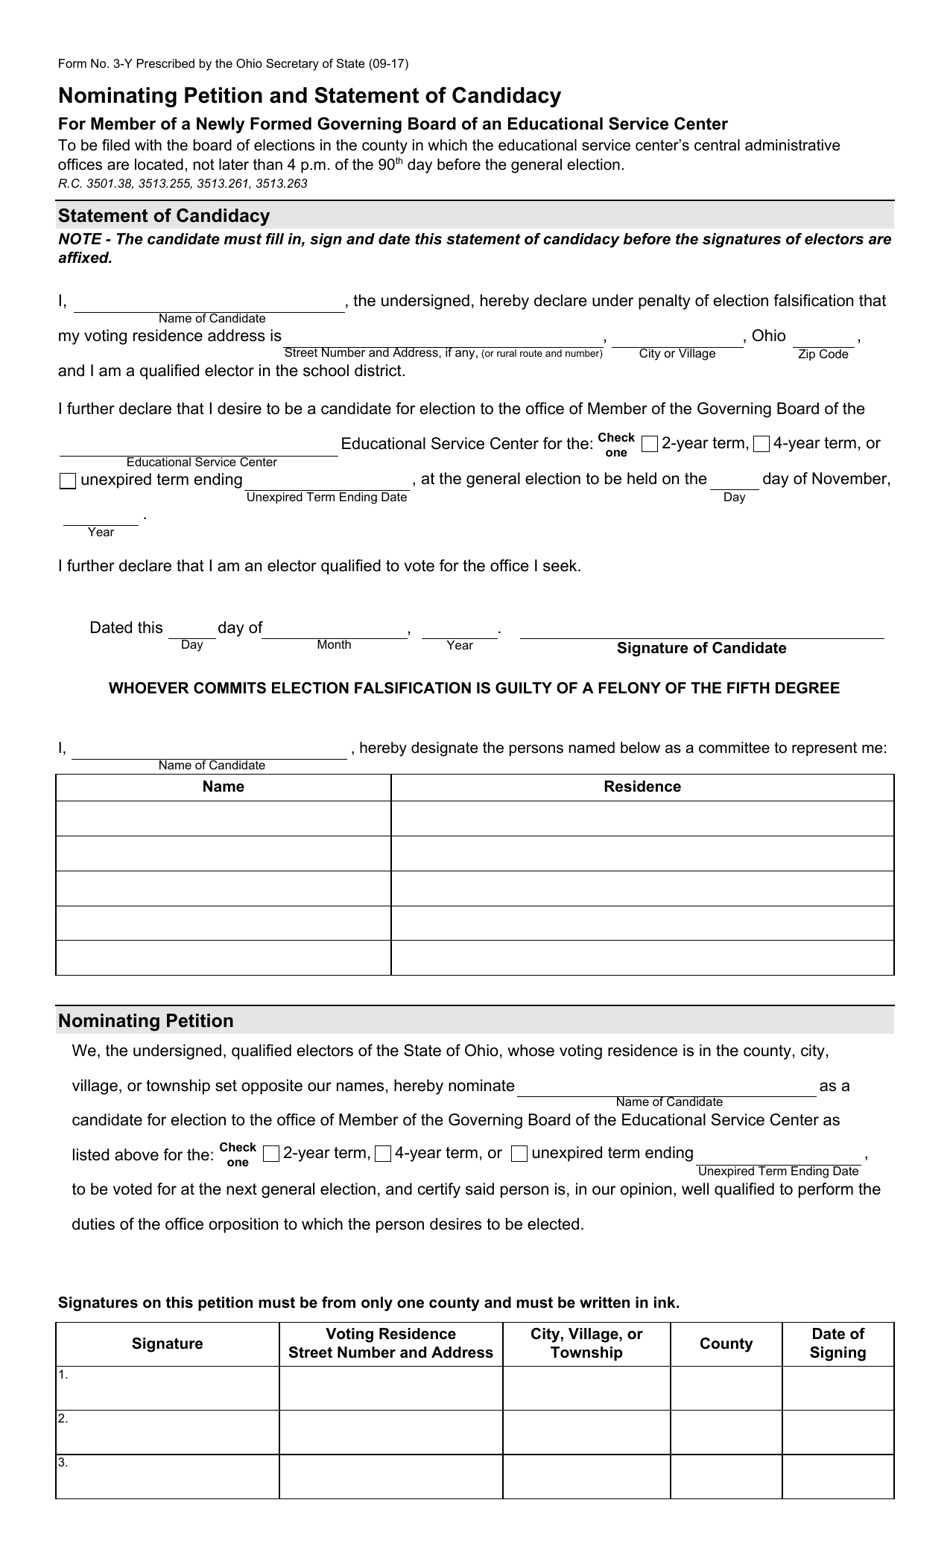 Form 3-Y Nominating Petition and Statement of Candidacy for Member of a Newly Formed Governing Board of an Educational Service Center - Ohio, Page 1